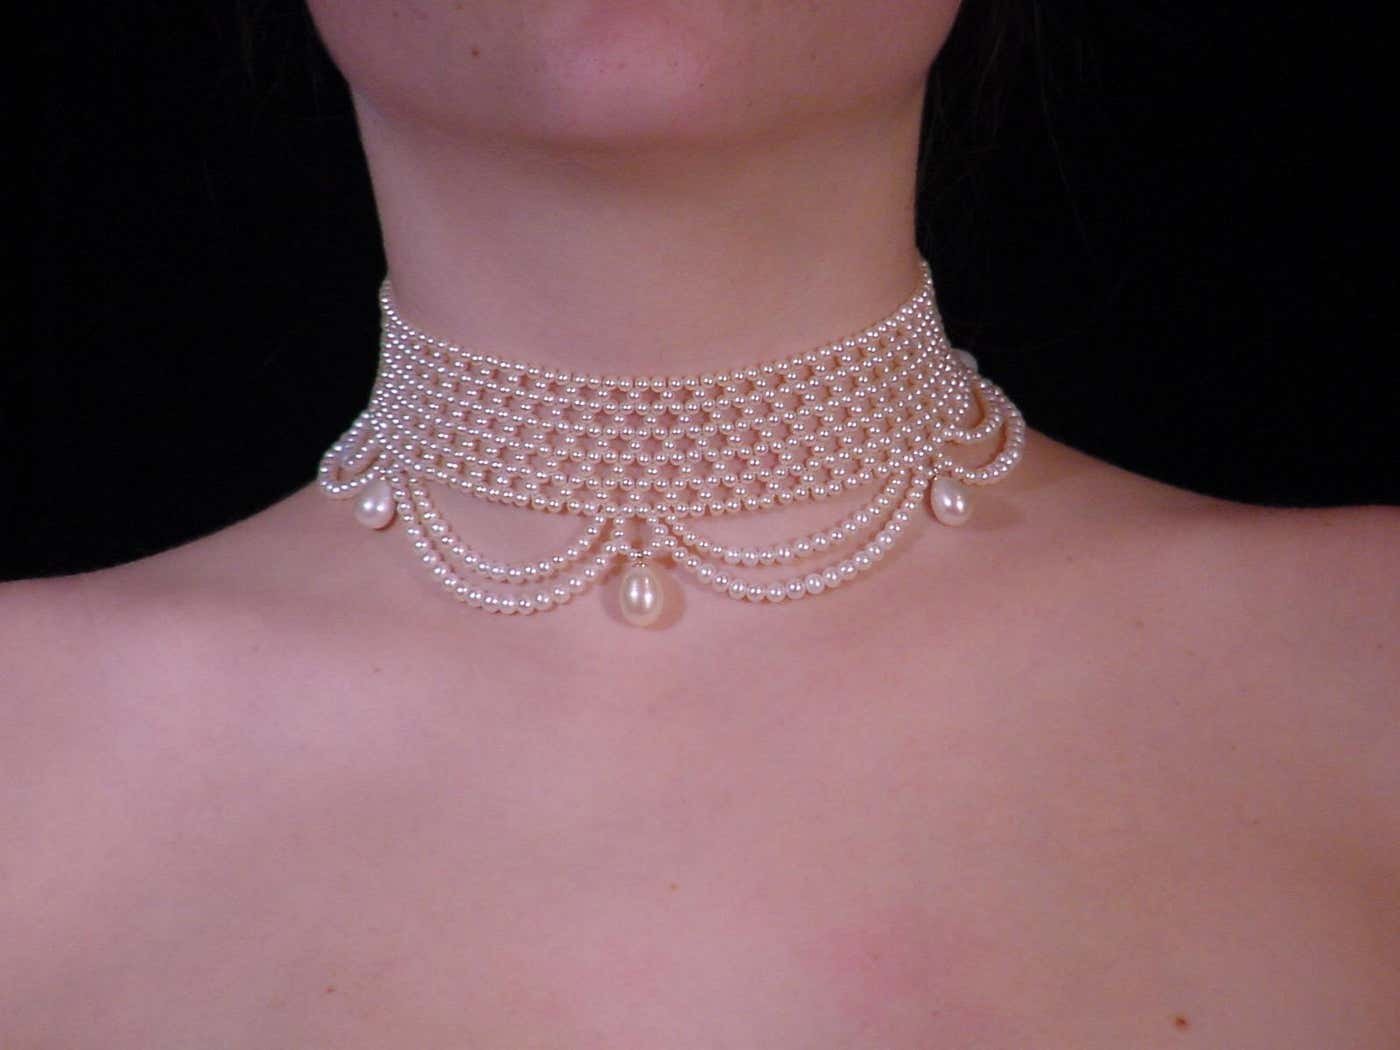 Woven Pearl Draped Choker with Pearl Drops and Secure Sliding Clasp